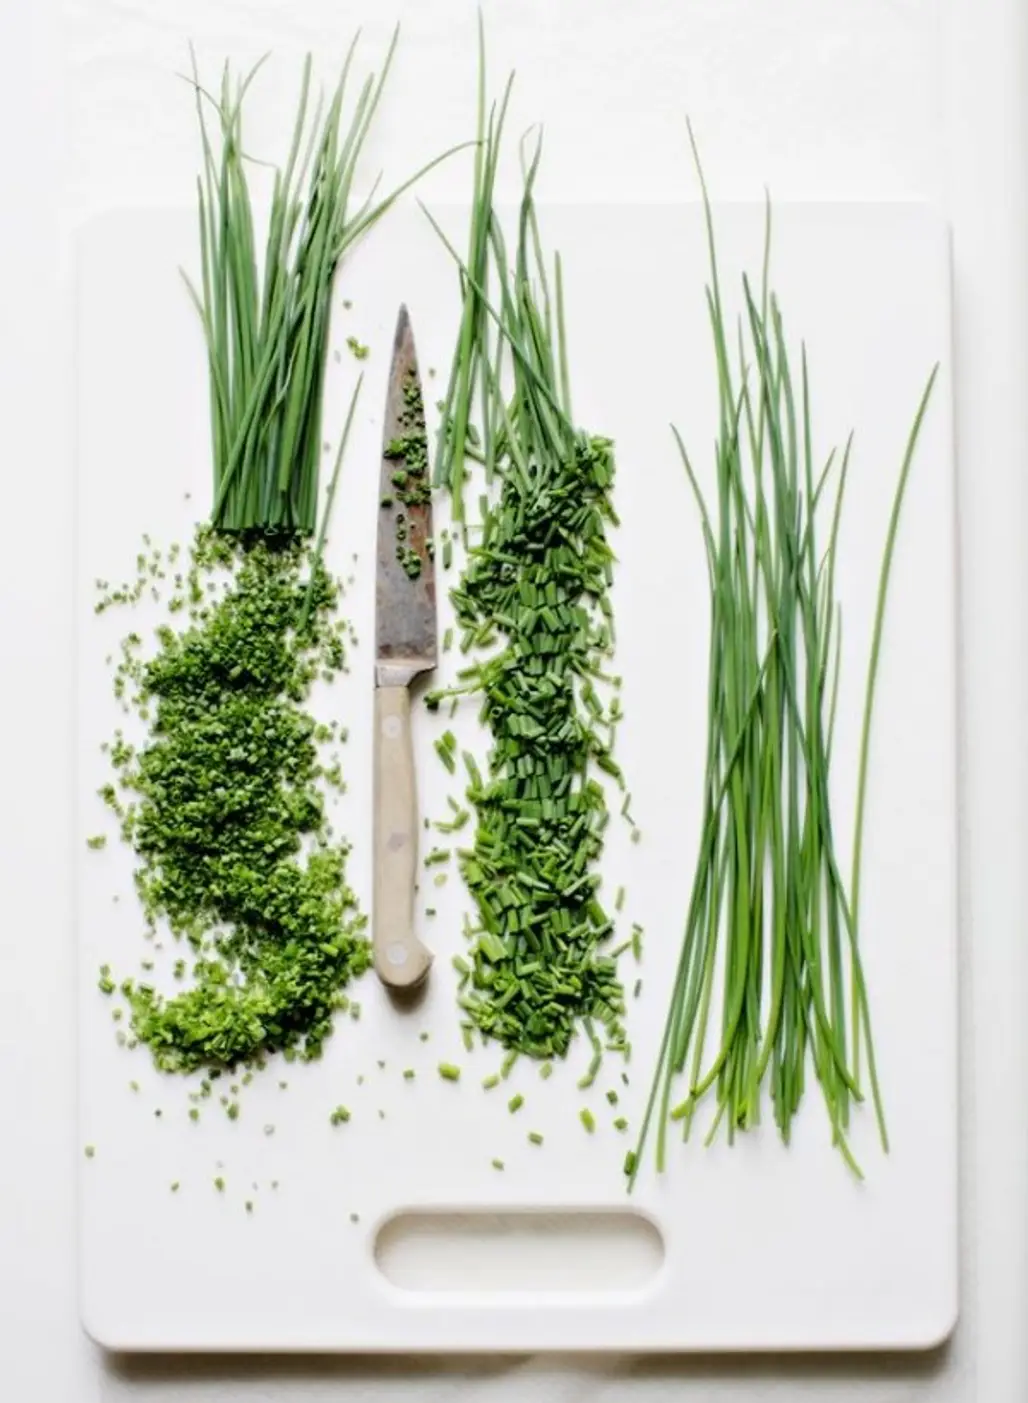 Green Onions/Chives